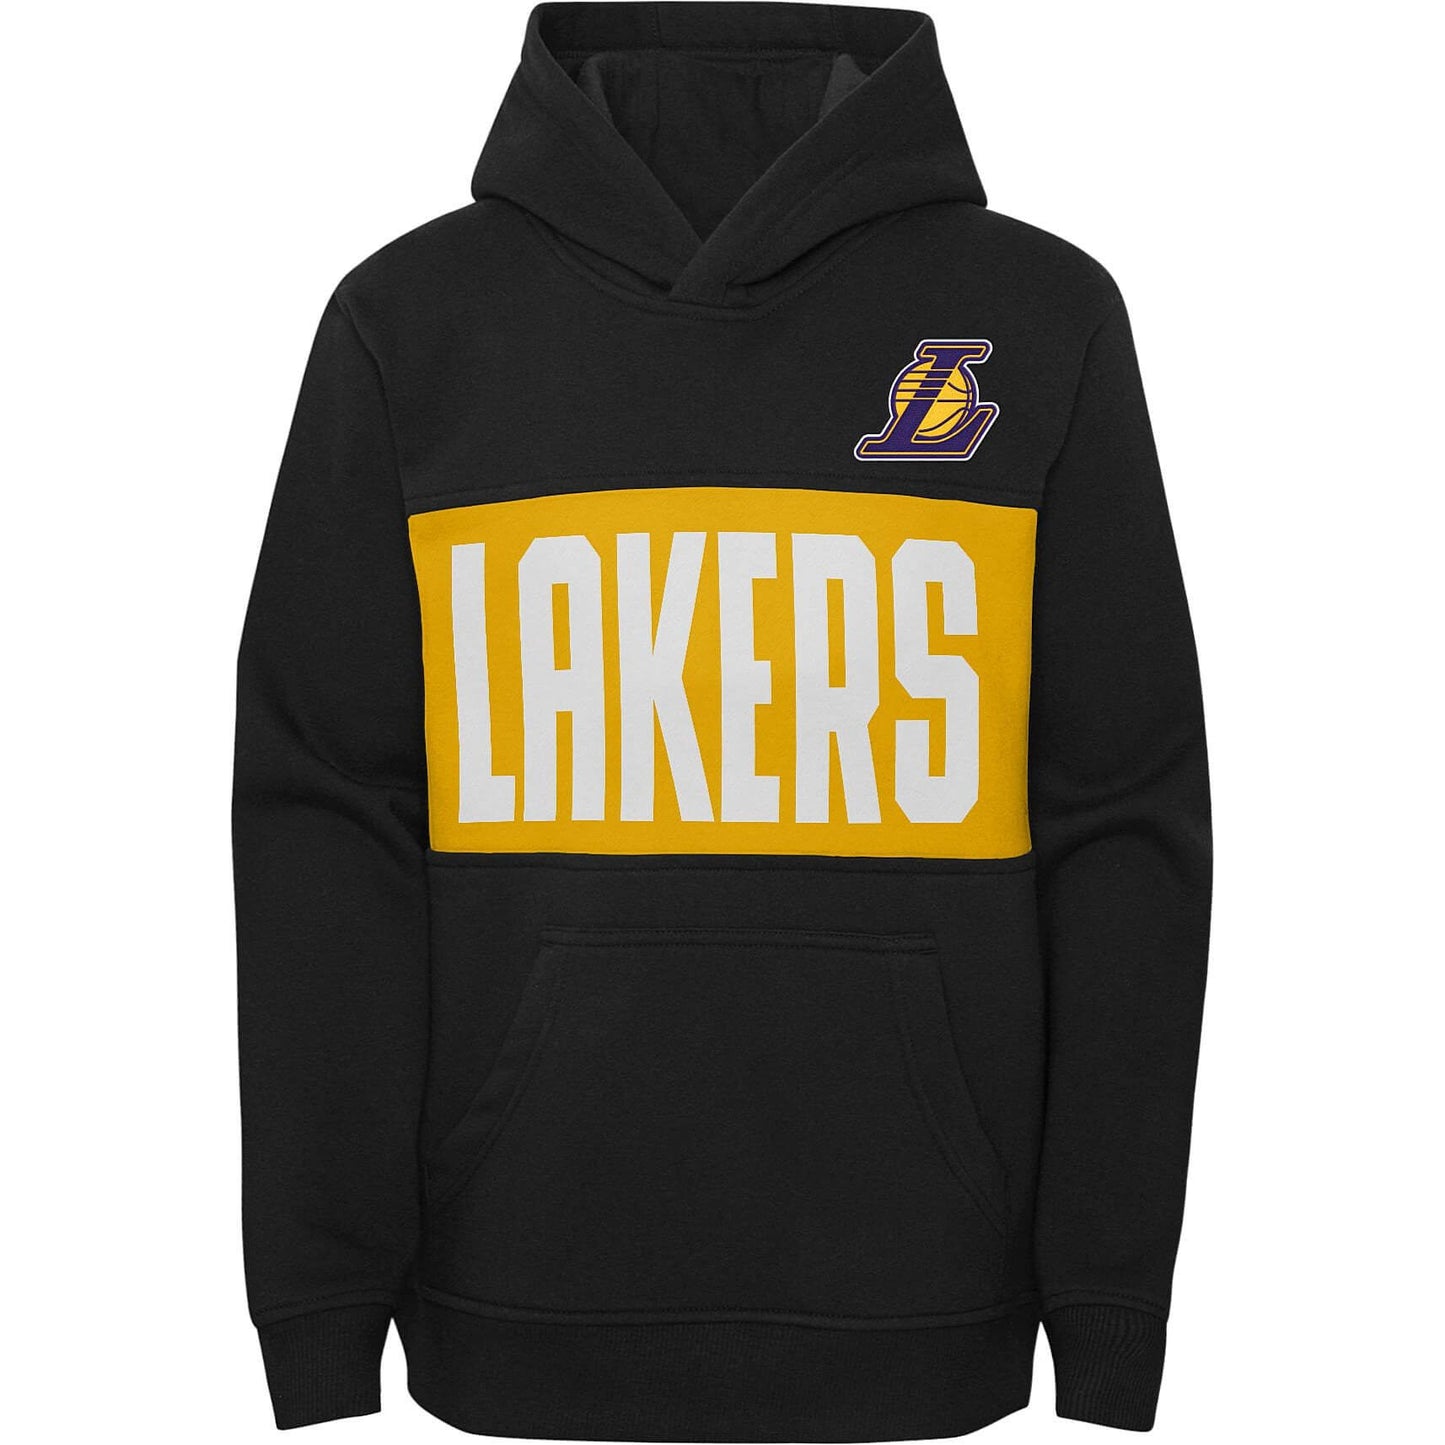 Outer Stuff Pole Position Pullover Hoodie - 8-20Y Los Angeles Lakers Black/Yellow